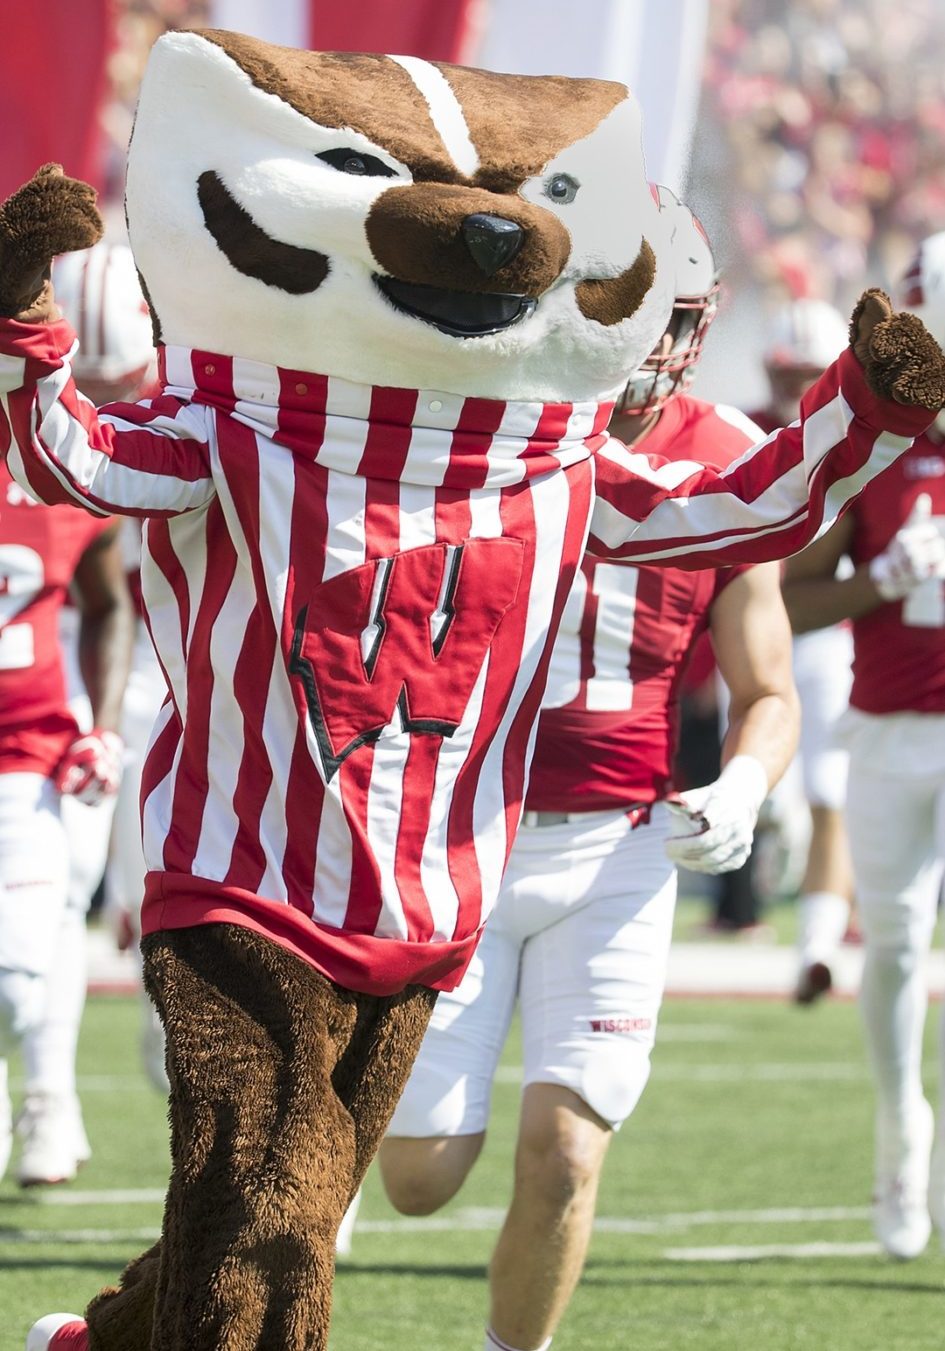 Wisconsin Badgers XXXX during an NCAA College Football game against the Florida Atlantic Owls Saturday, September 9, 2017, in Madison, Wis. The Badgers won 31-14. (Photo by David Stluka)